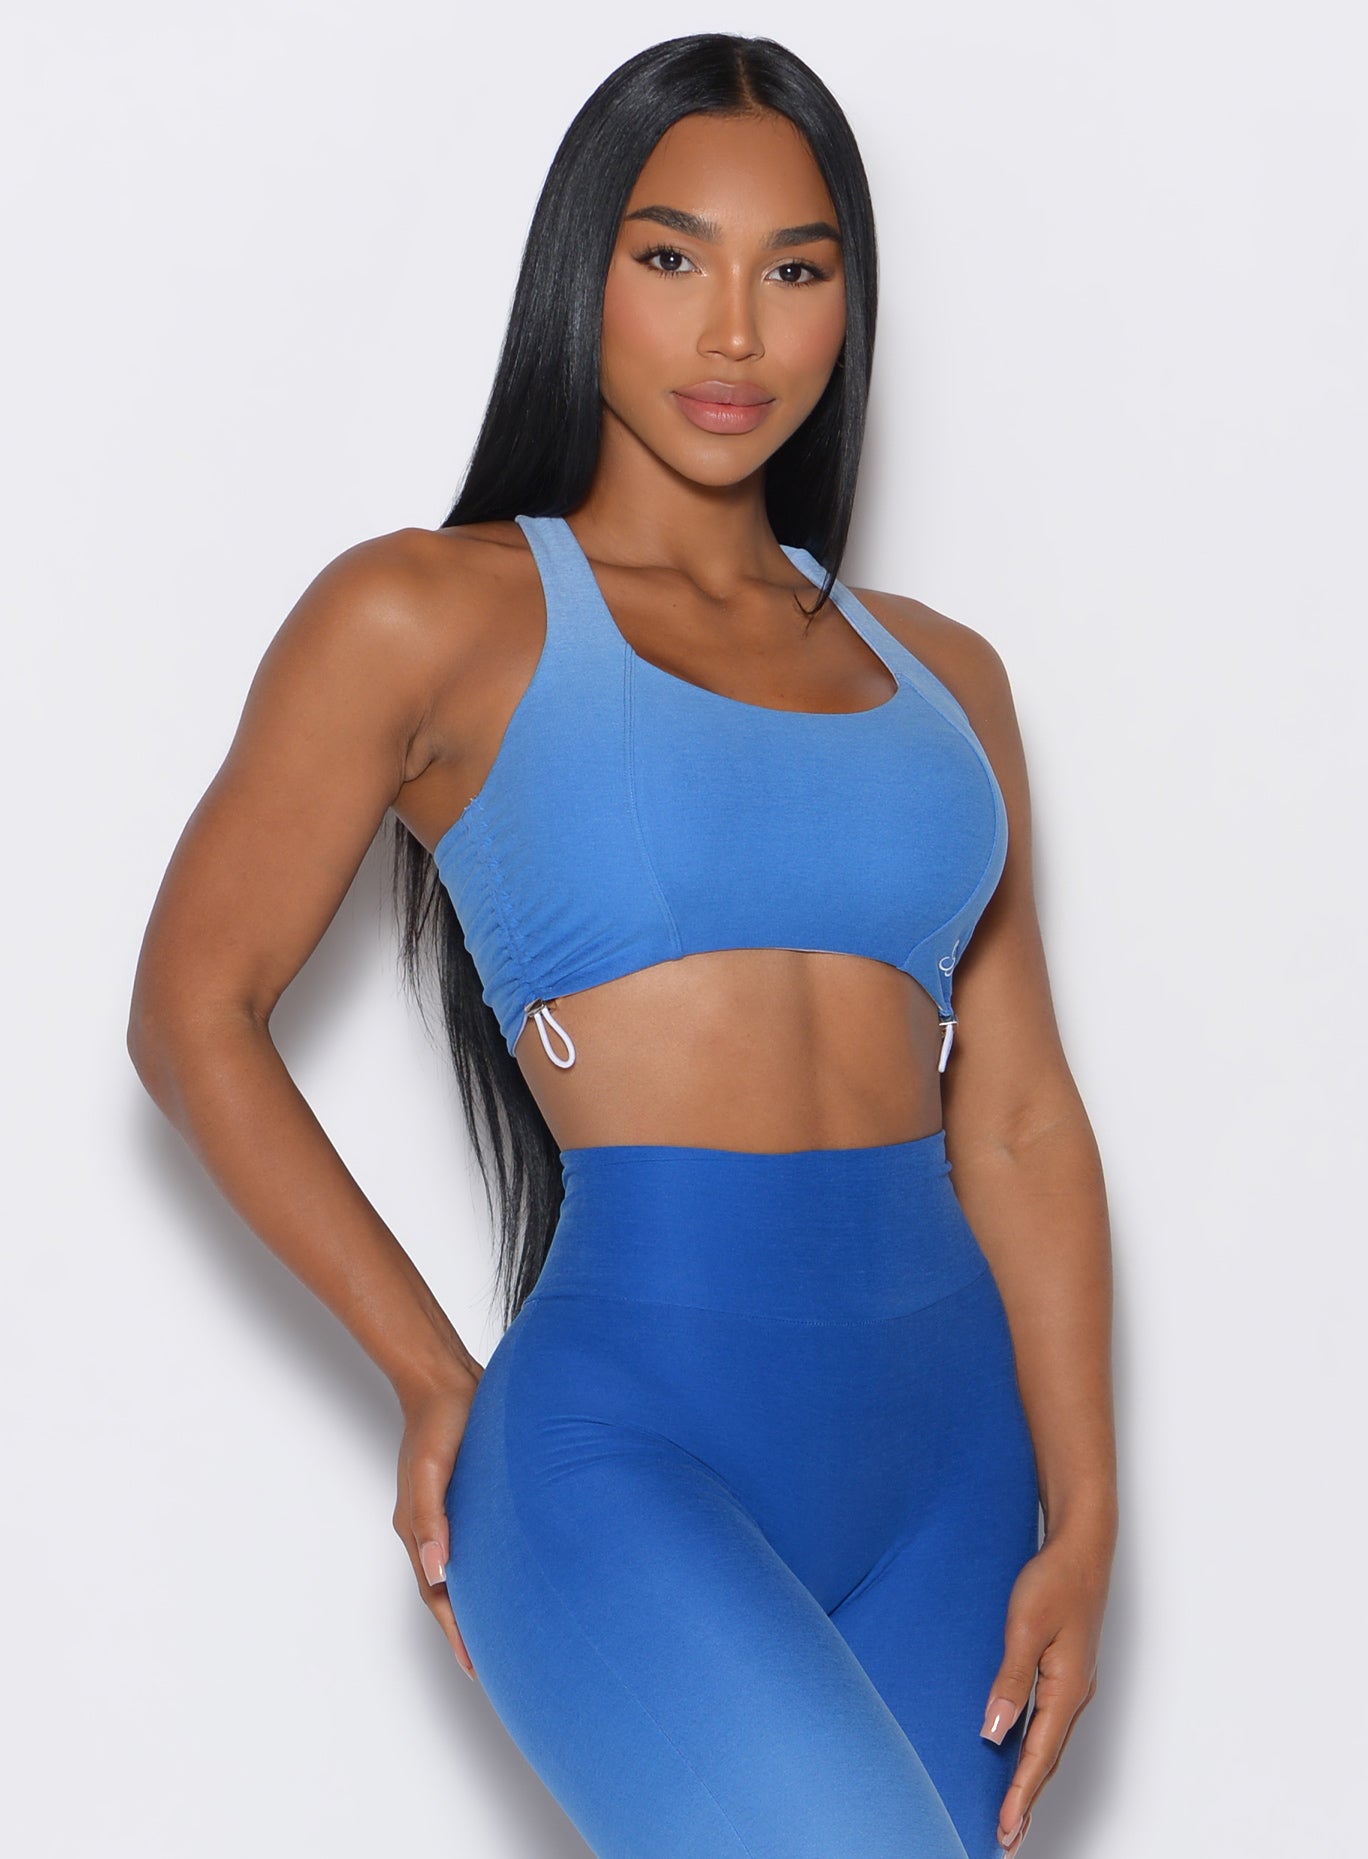 front profile view of a model facing forward wearing our toggle sports bra in Ombre Blue Crush color along with the matching leggings